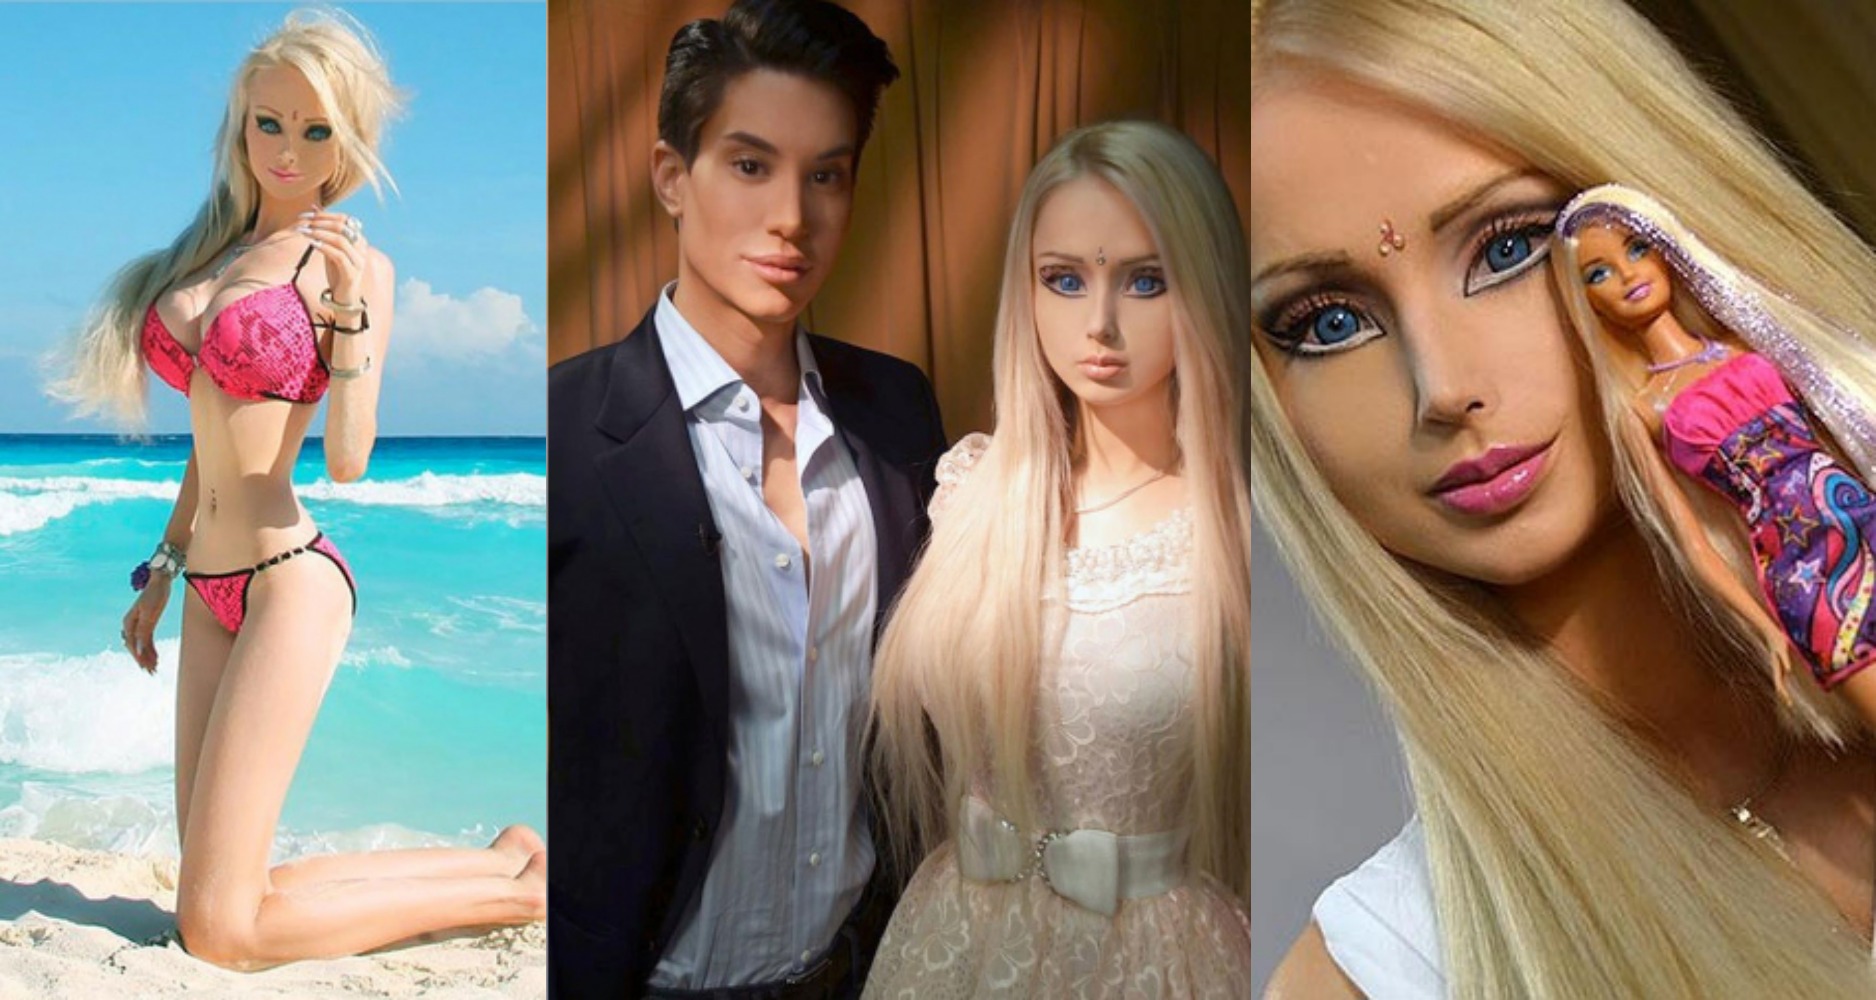 Mattel Barbie and Ken Dolls In Real Life.